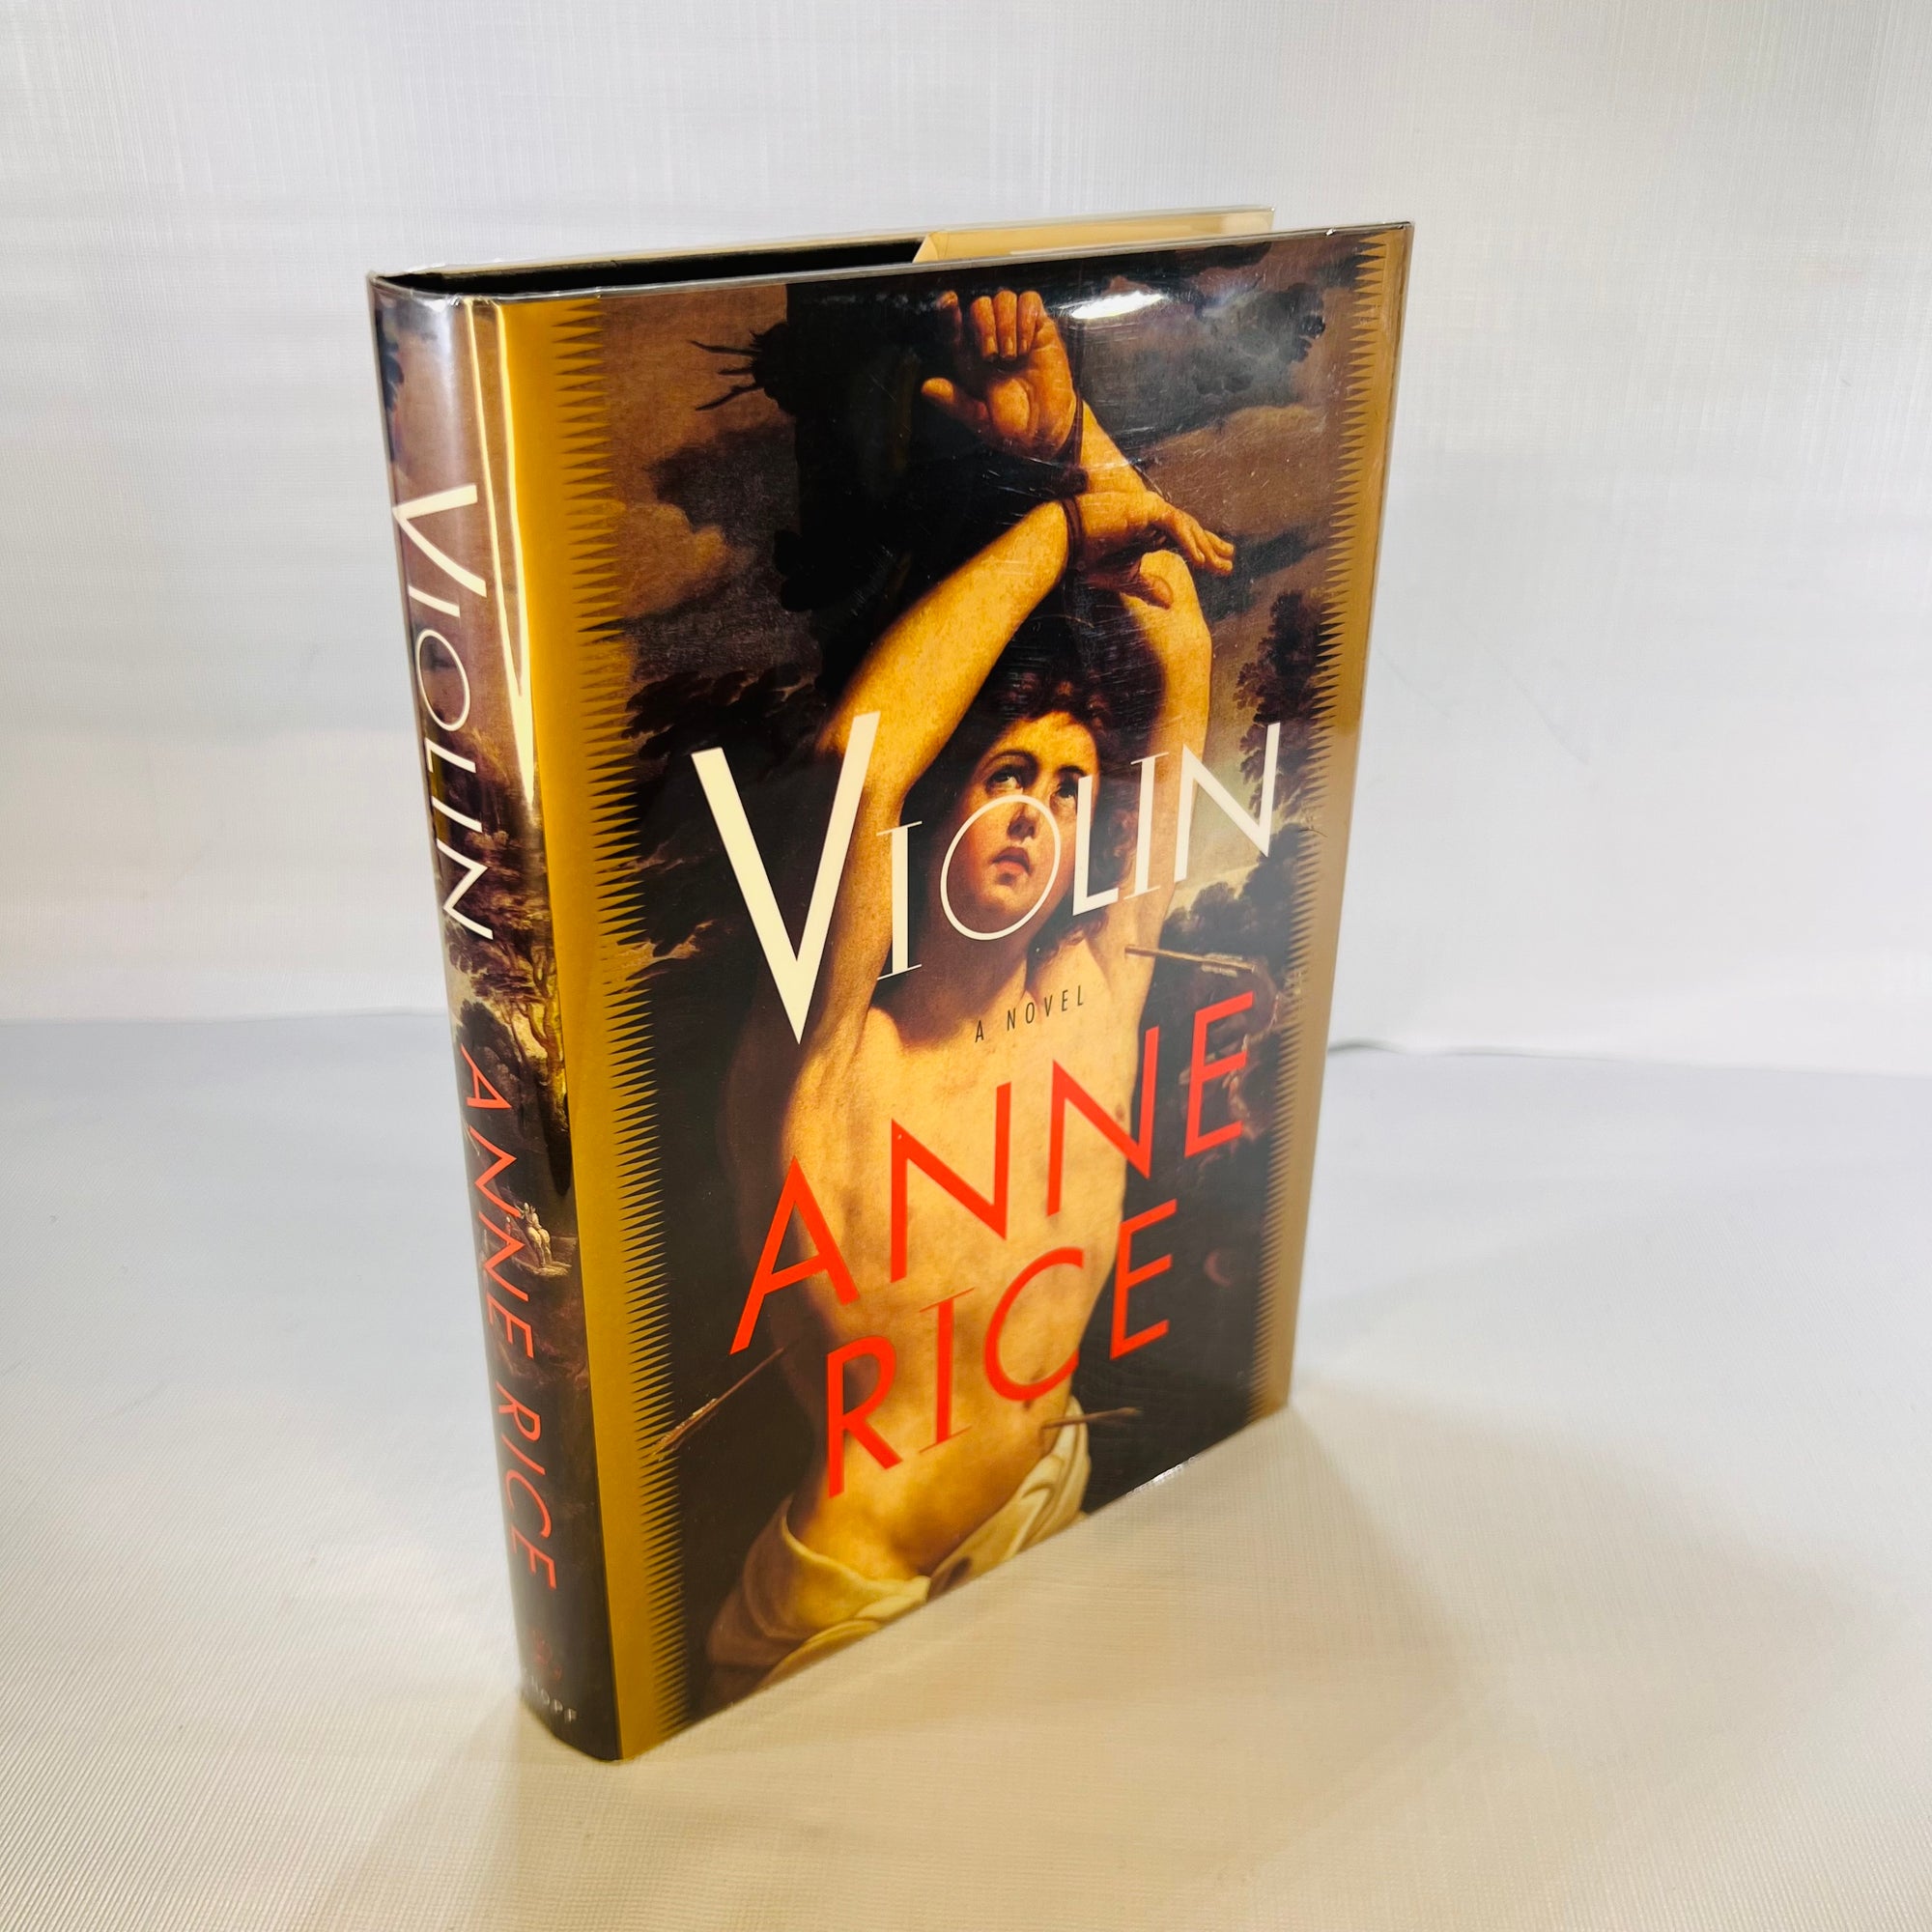 Violin a Novel by Anne Rice 1997 Alfred A. Knopf